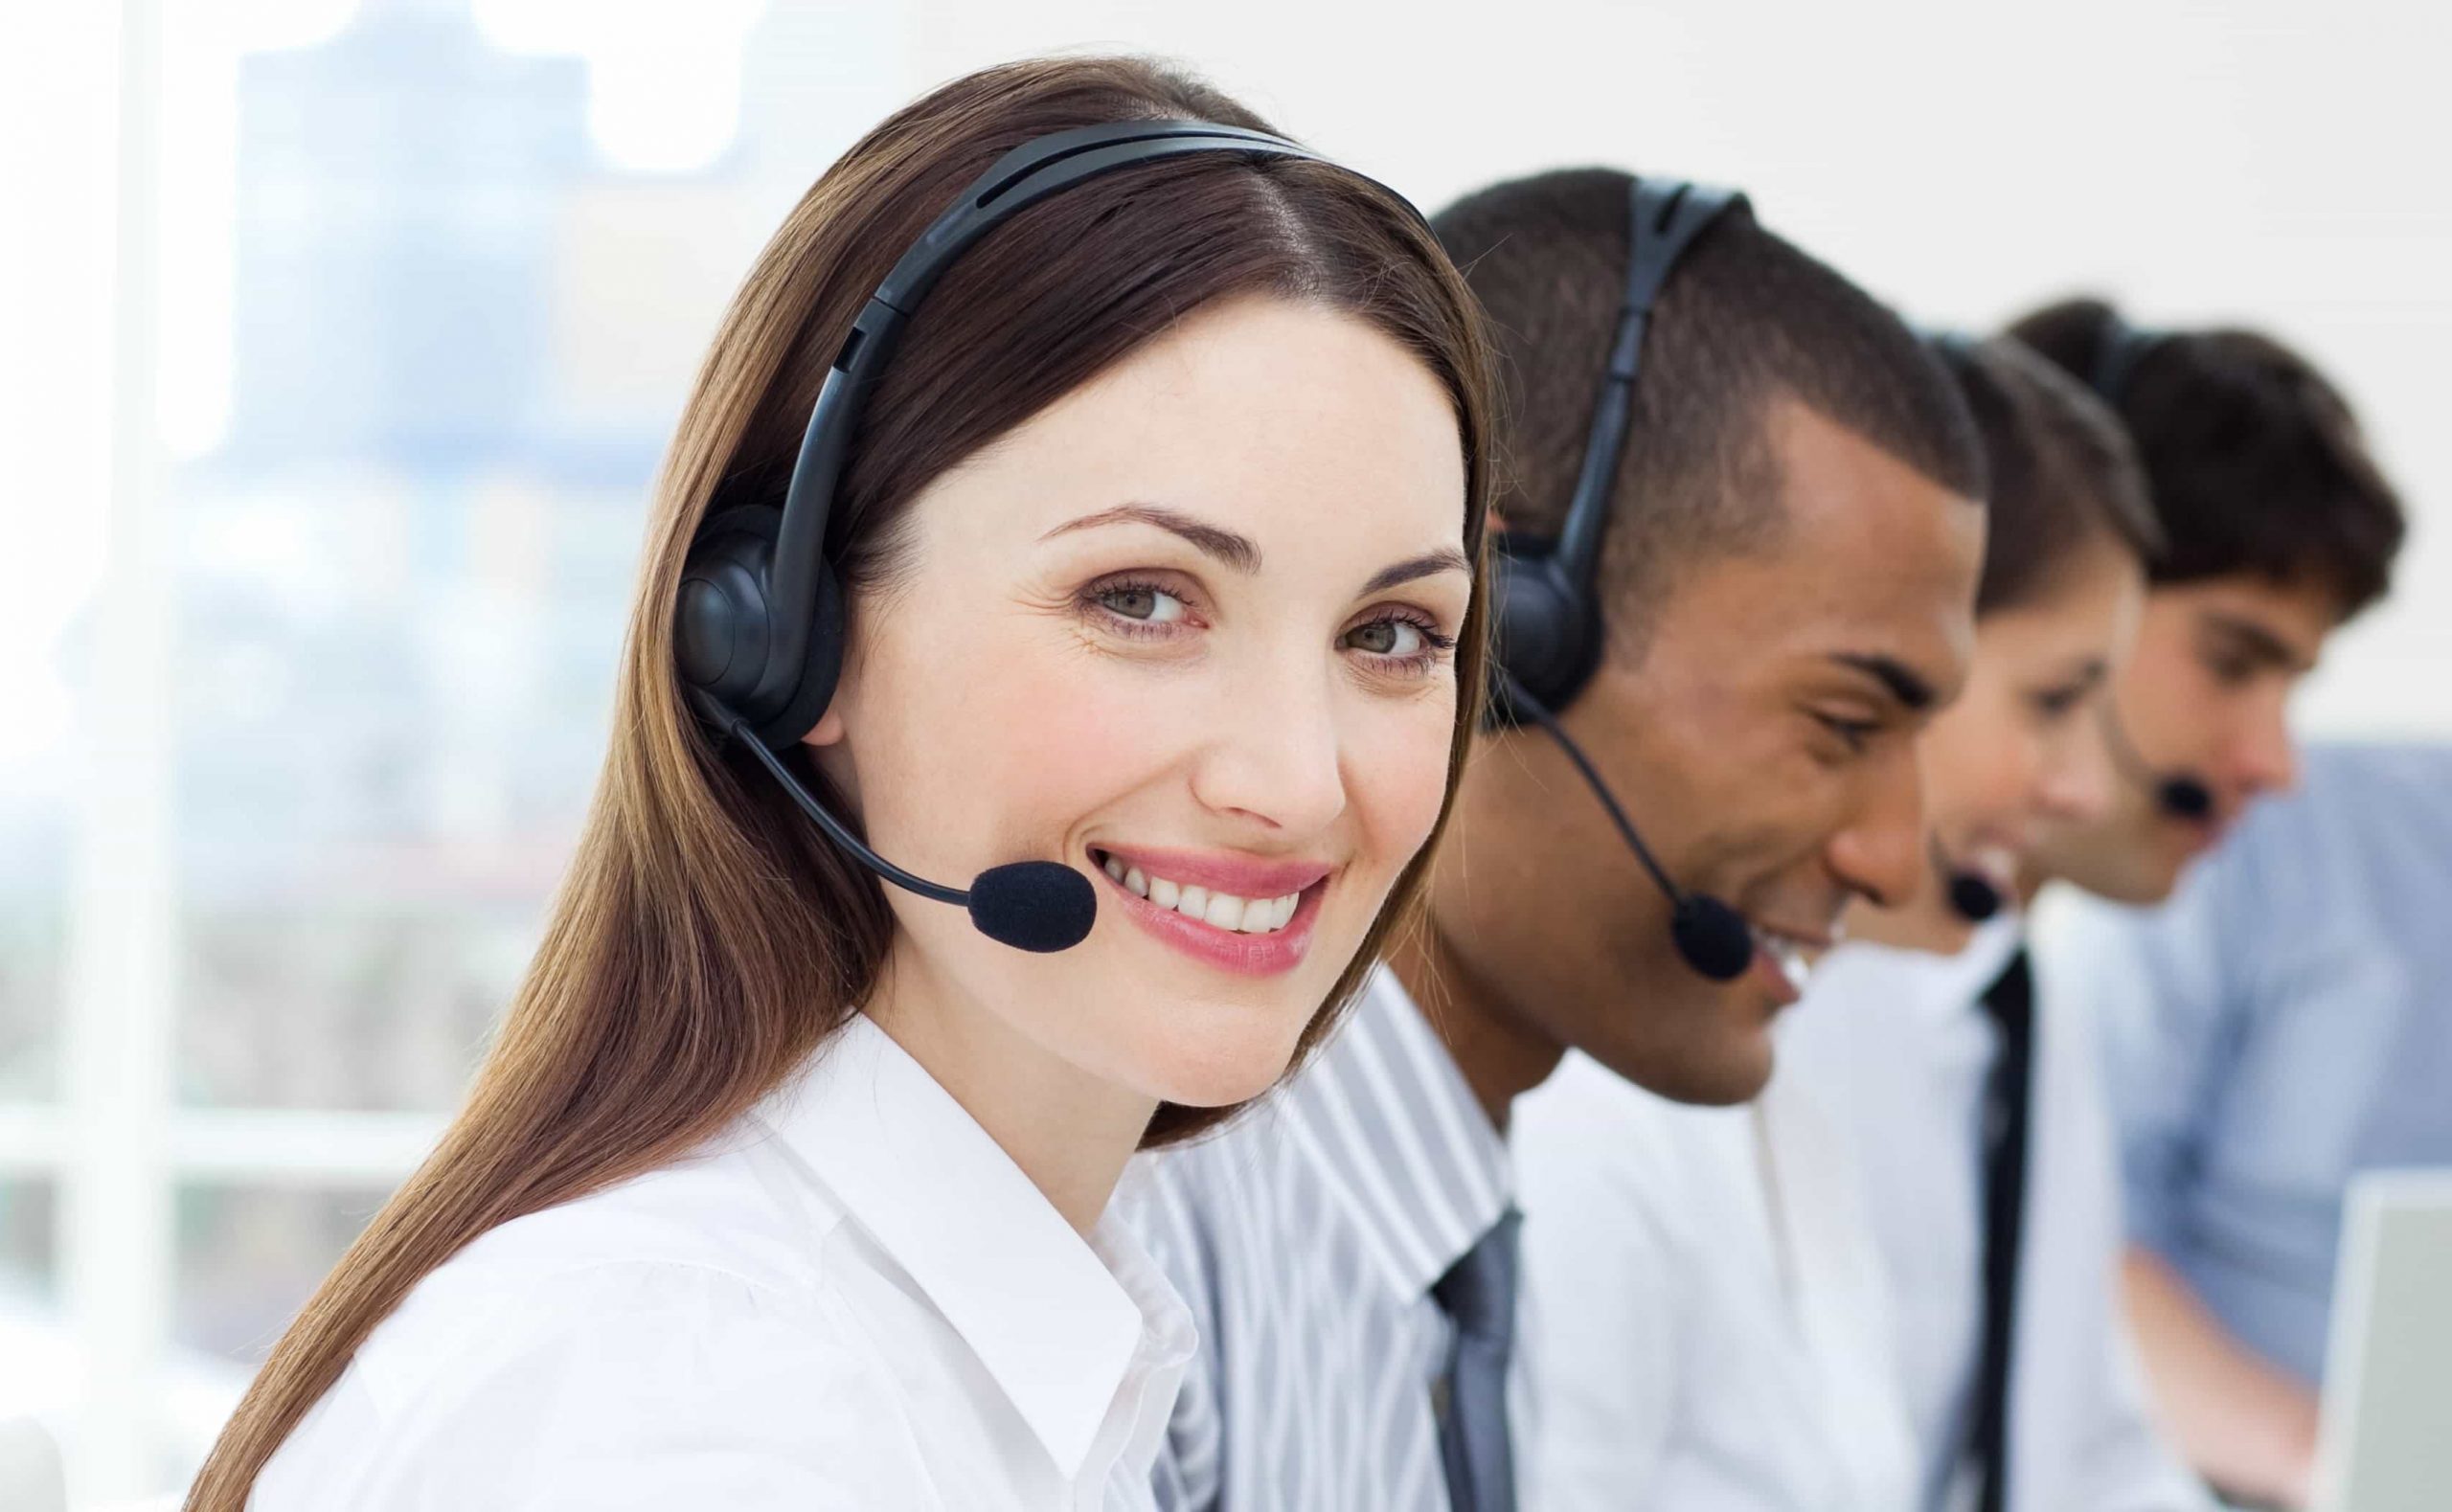 Customer Service Representative on phone with land owner